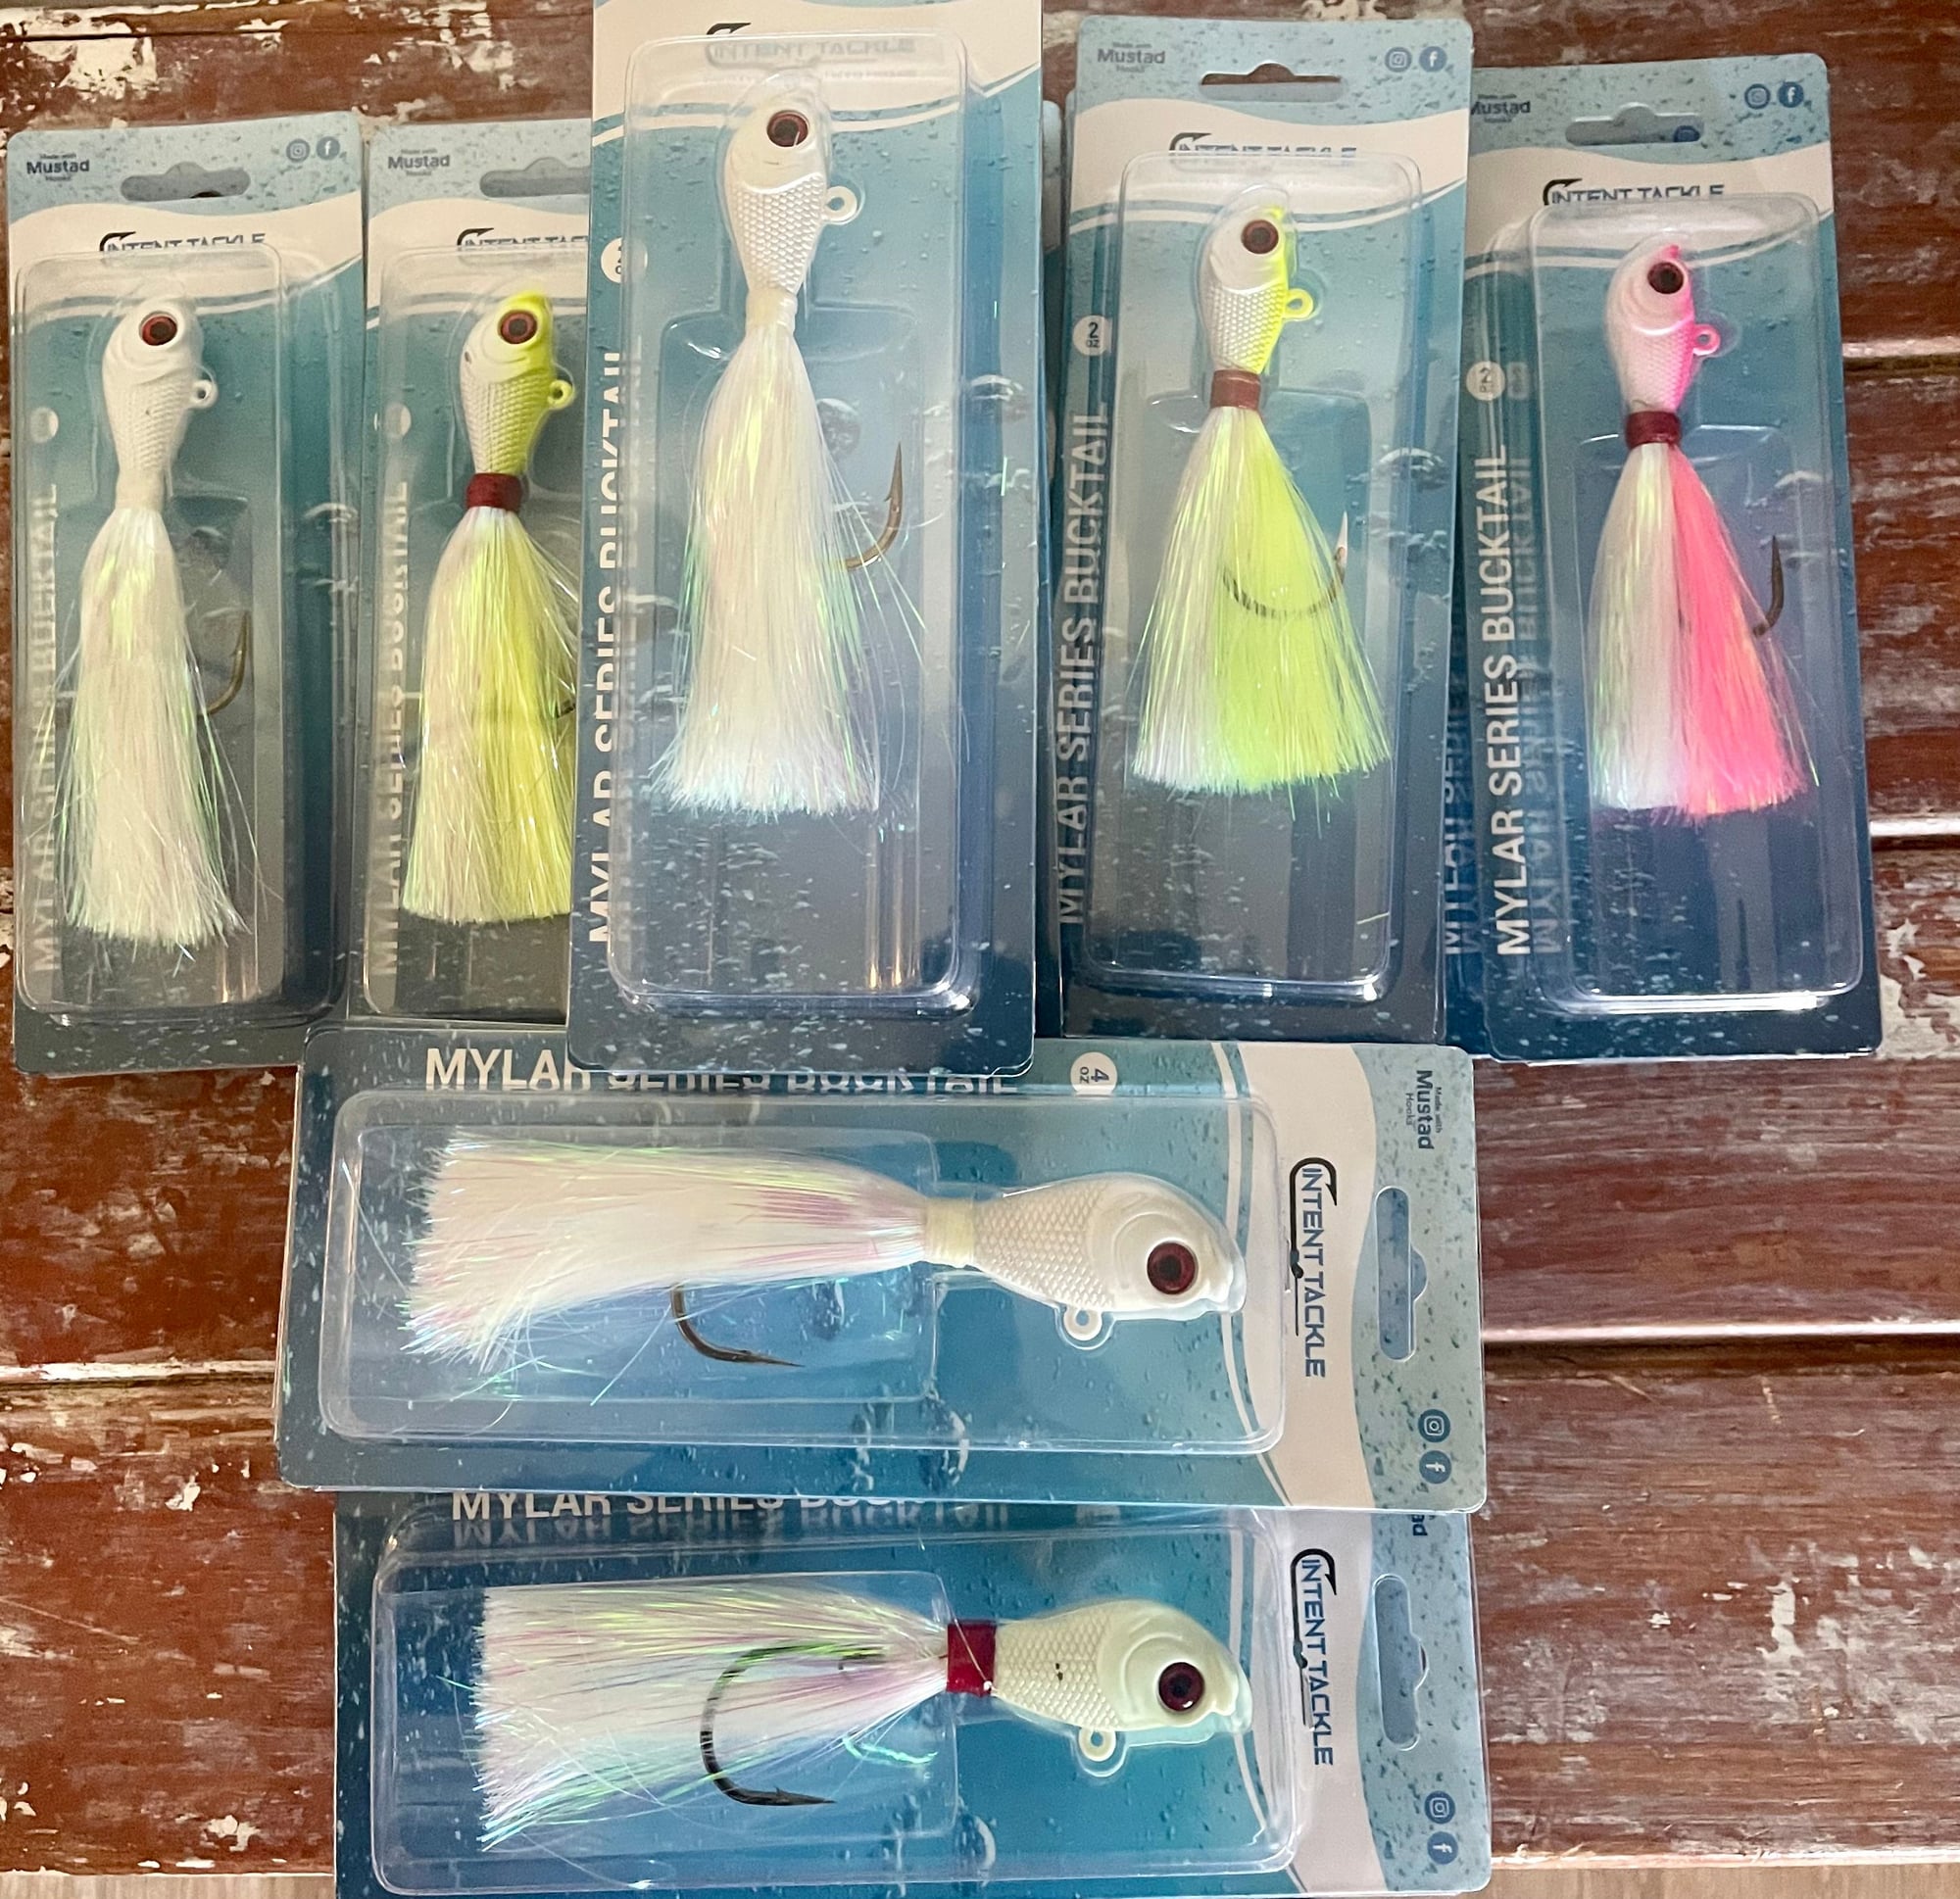 Intent Tackle Chipped Paint Mylar Bucktail Sale - The Hull Truth - Boating  and Fishing Forum